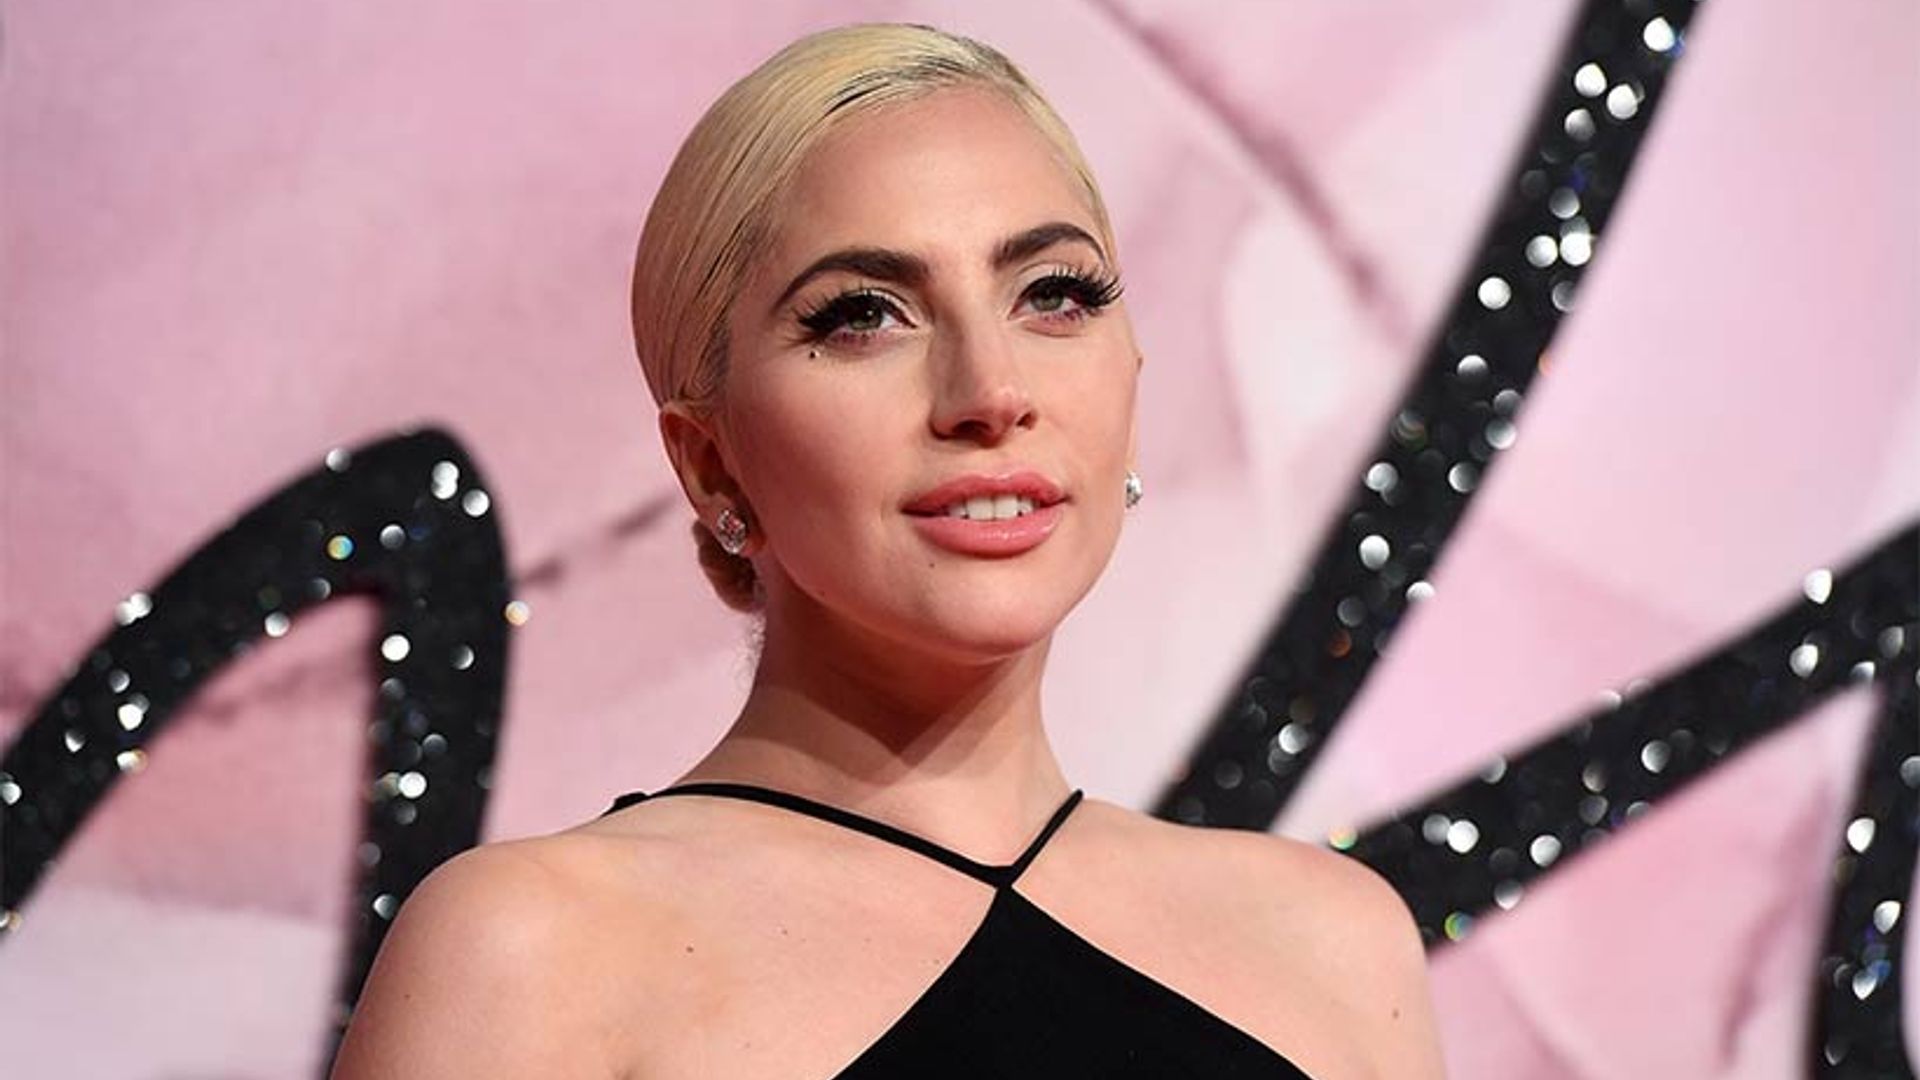 Lady Gaga opens up about her experiences with fibromyalgia